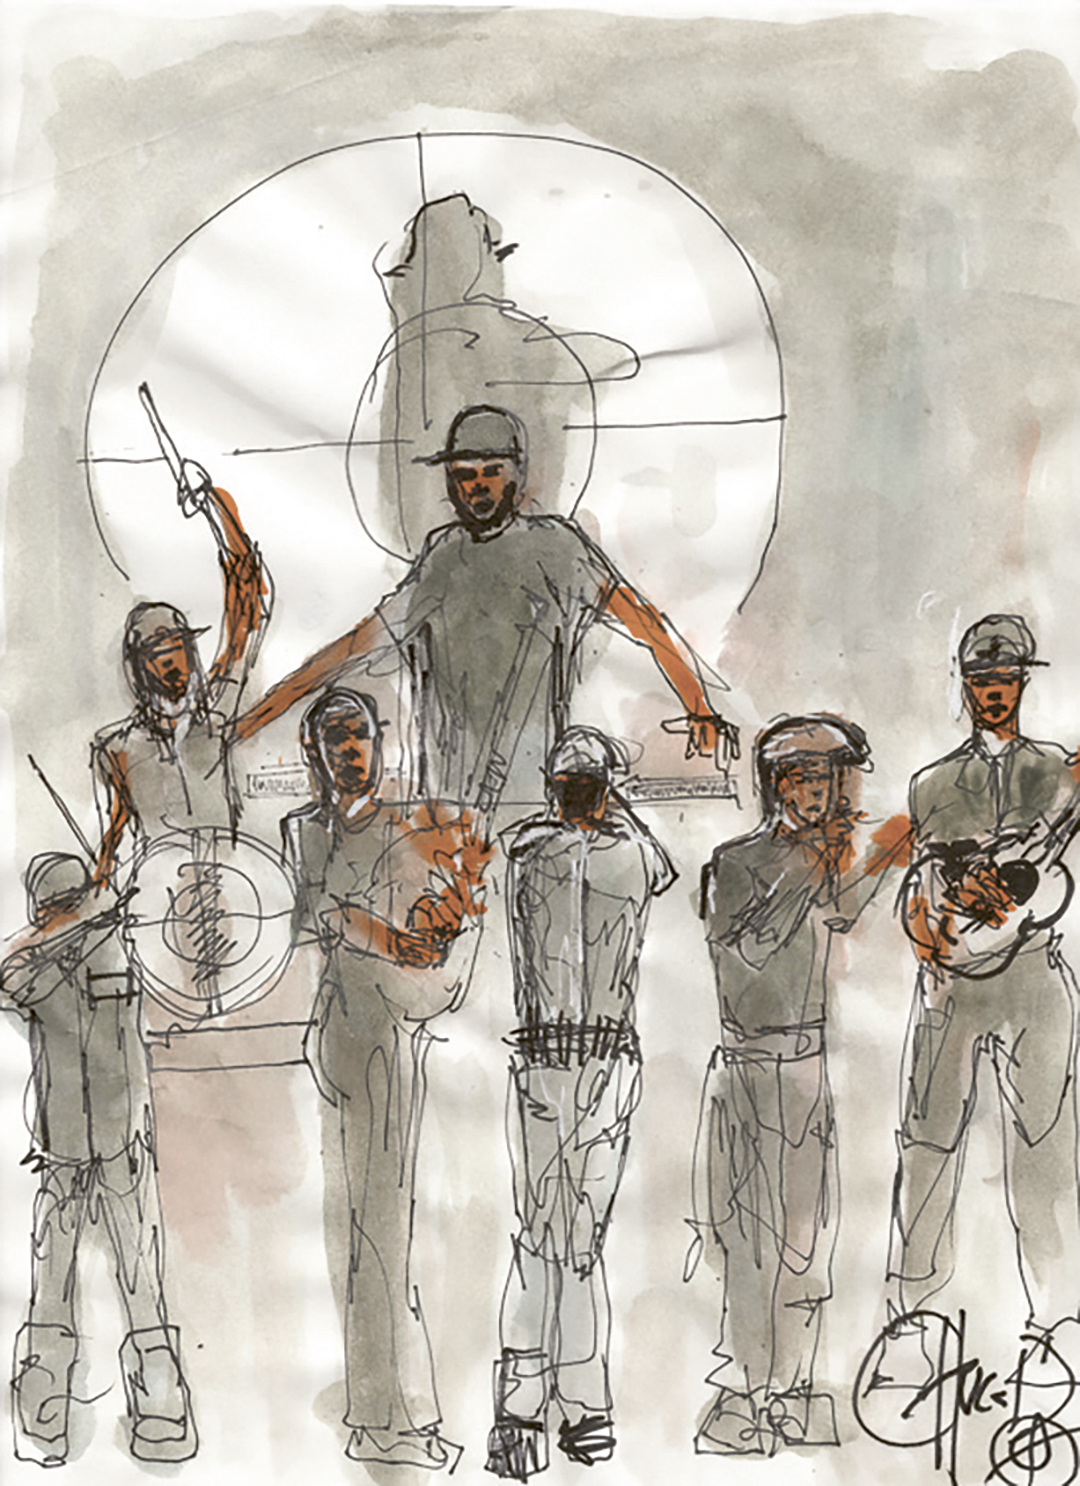 Chuck D's drawing of Public Enemy on stage